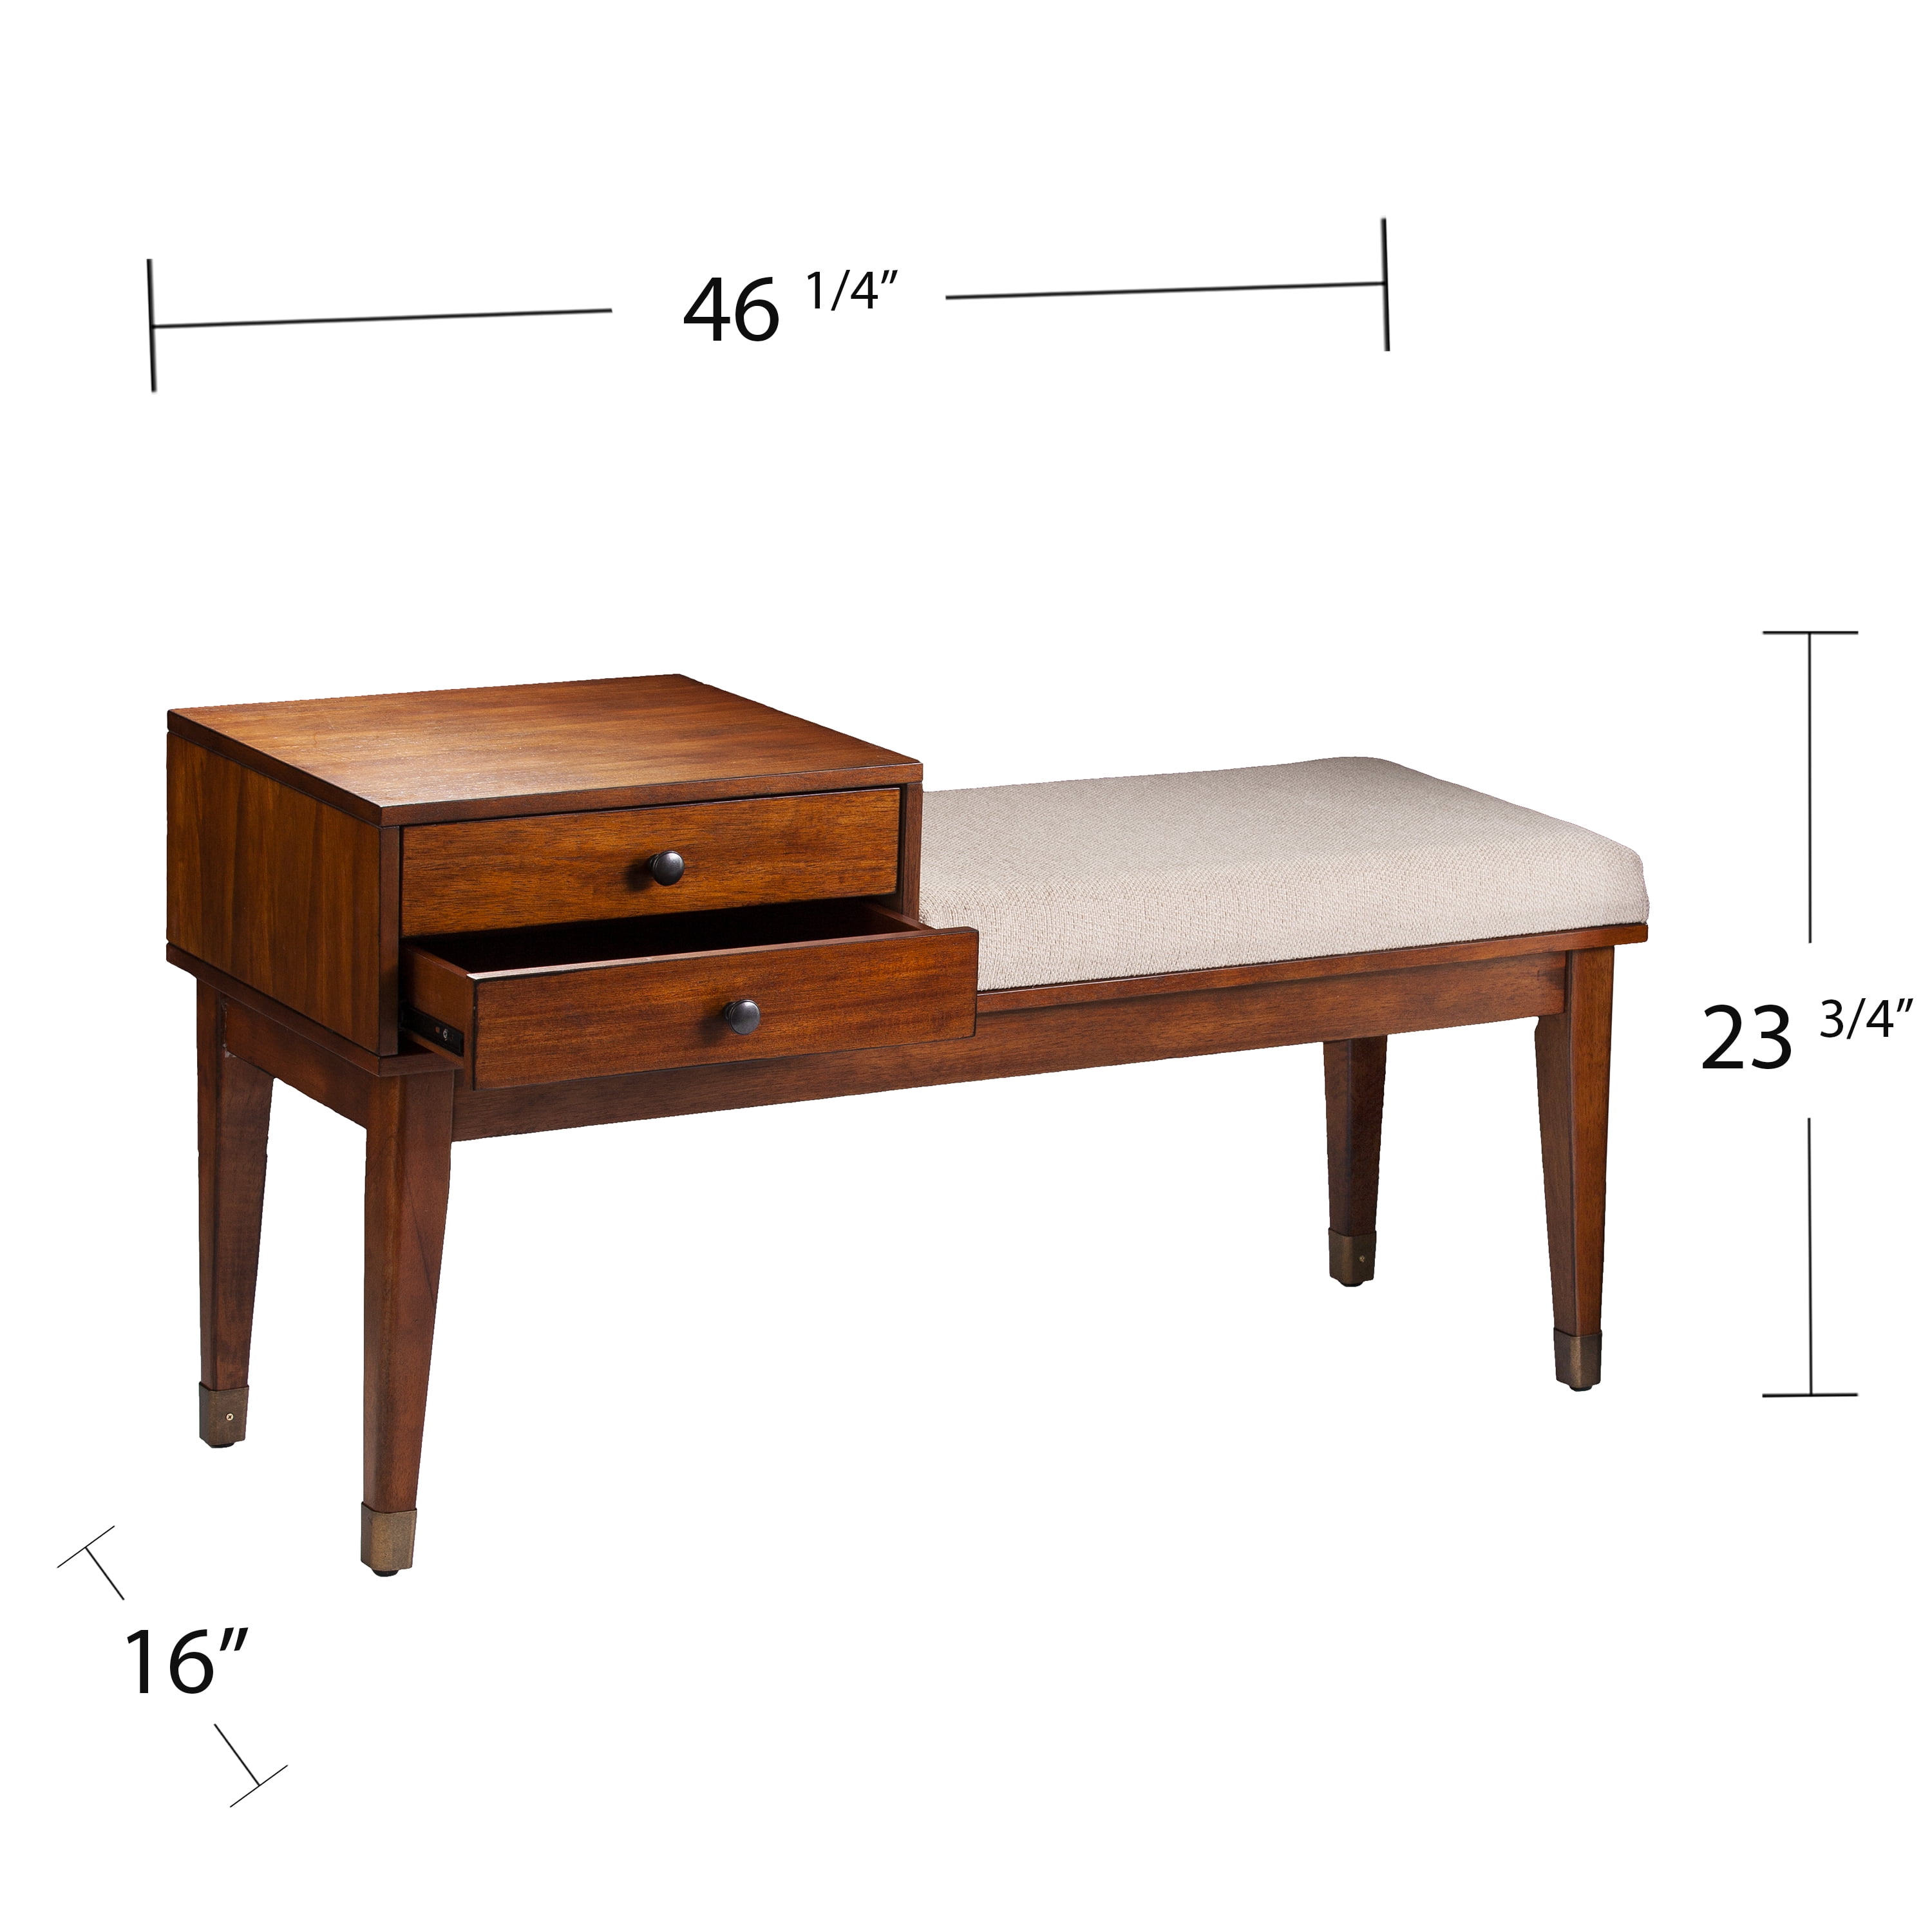 A Storage Bench for Small Entryway Space - Southern Revivals